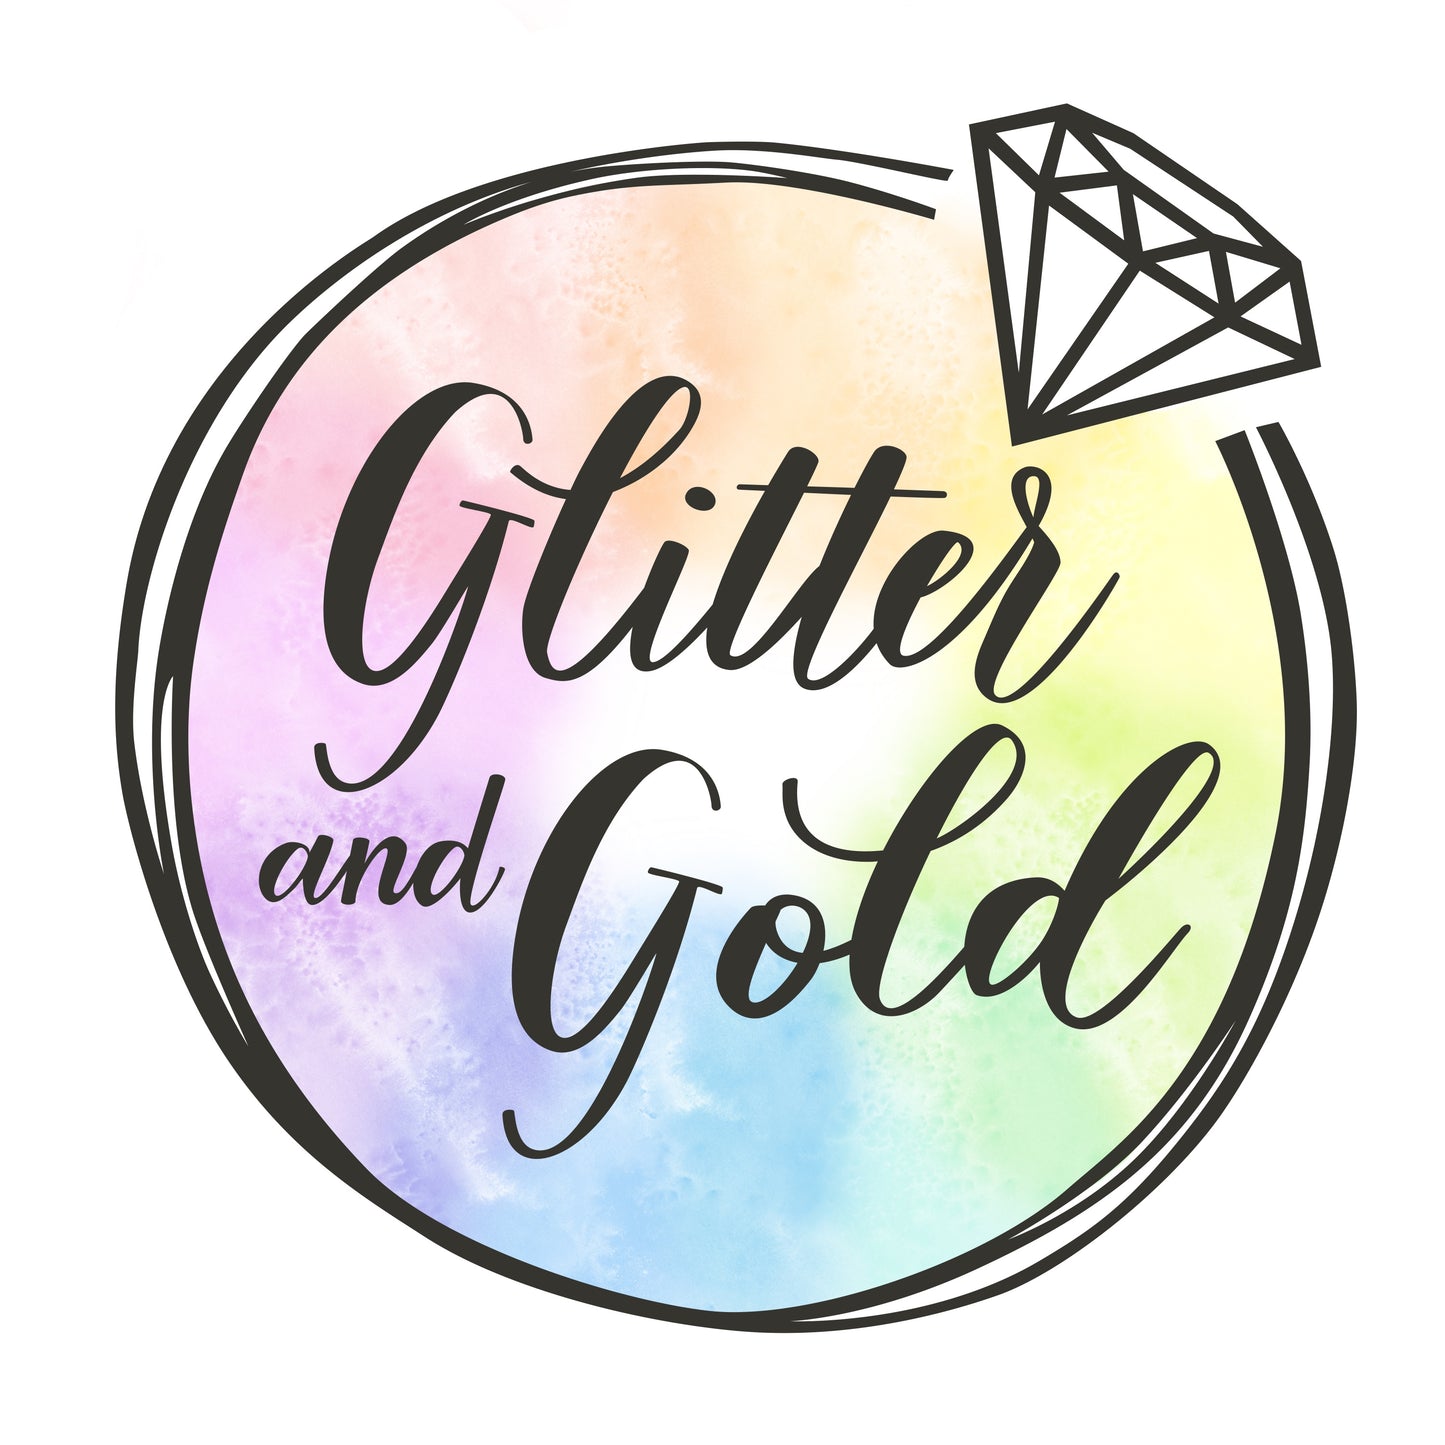 Glitter and Gold Gift Card!